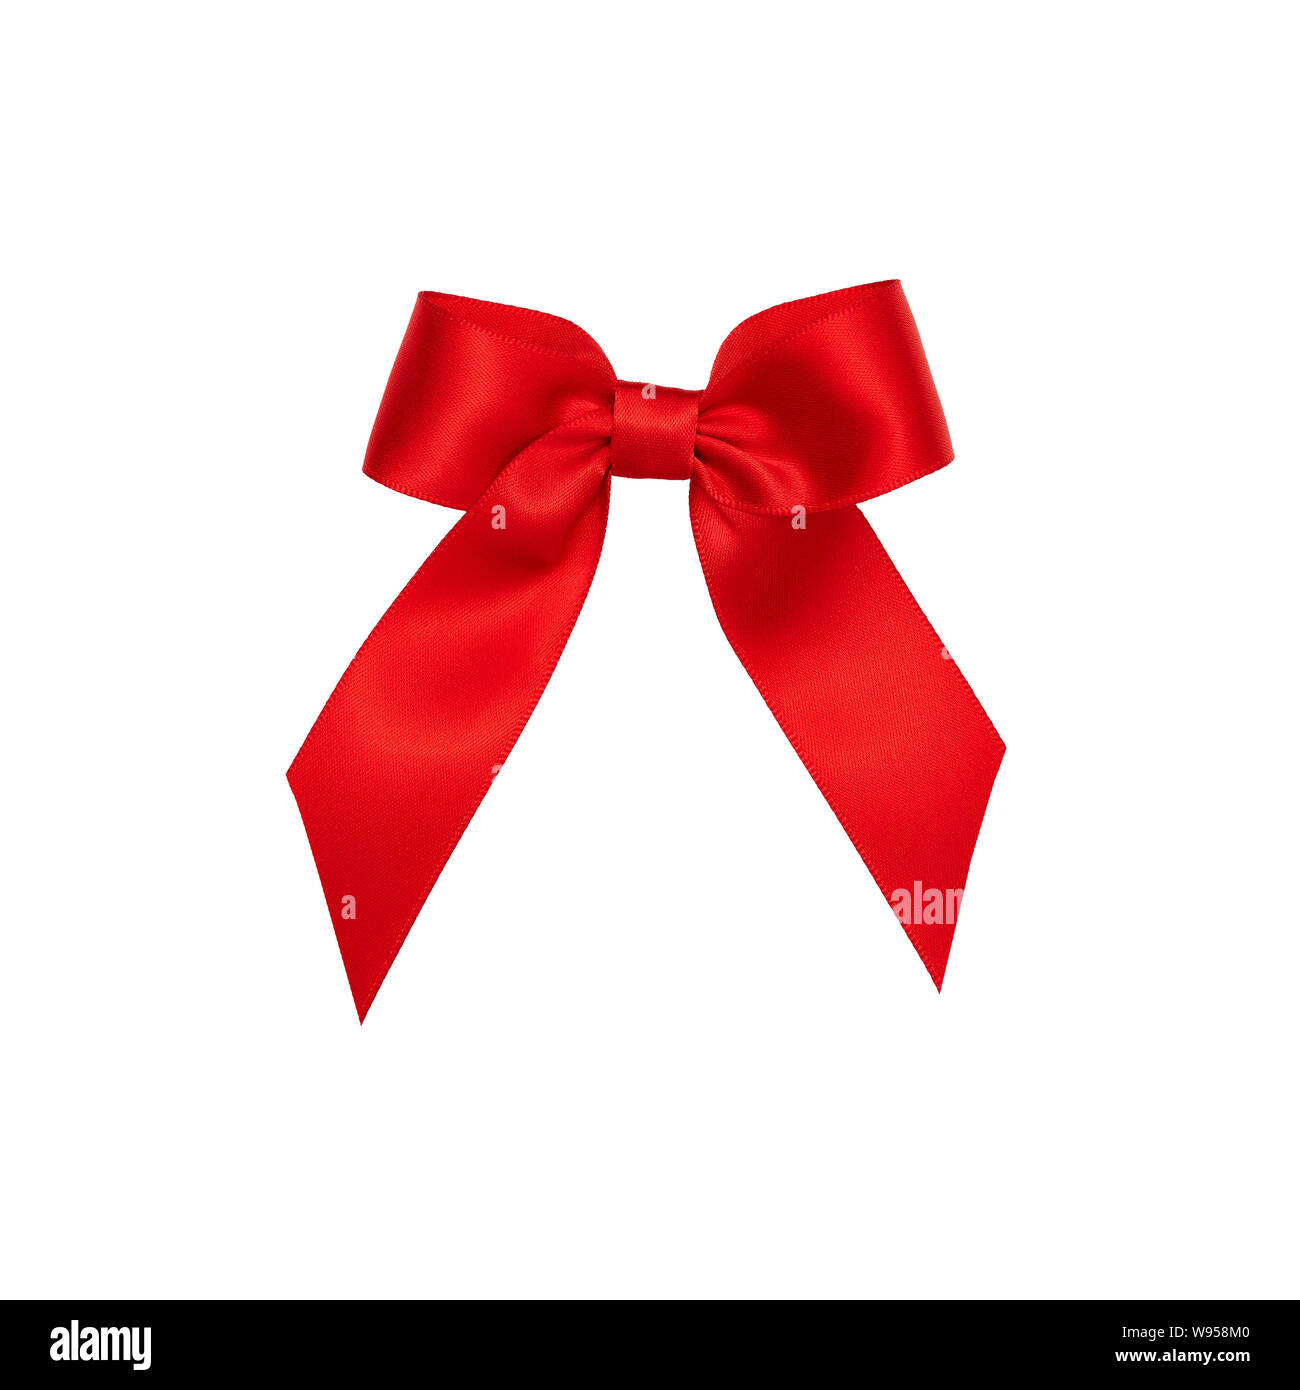 Red bow cut out and isolated on white background Stock Photo